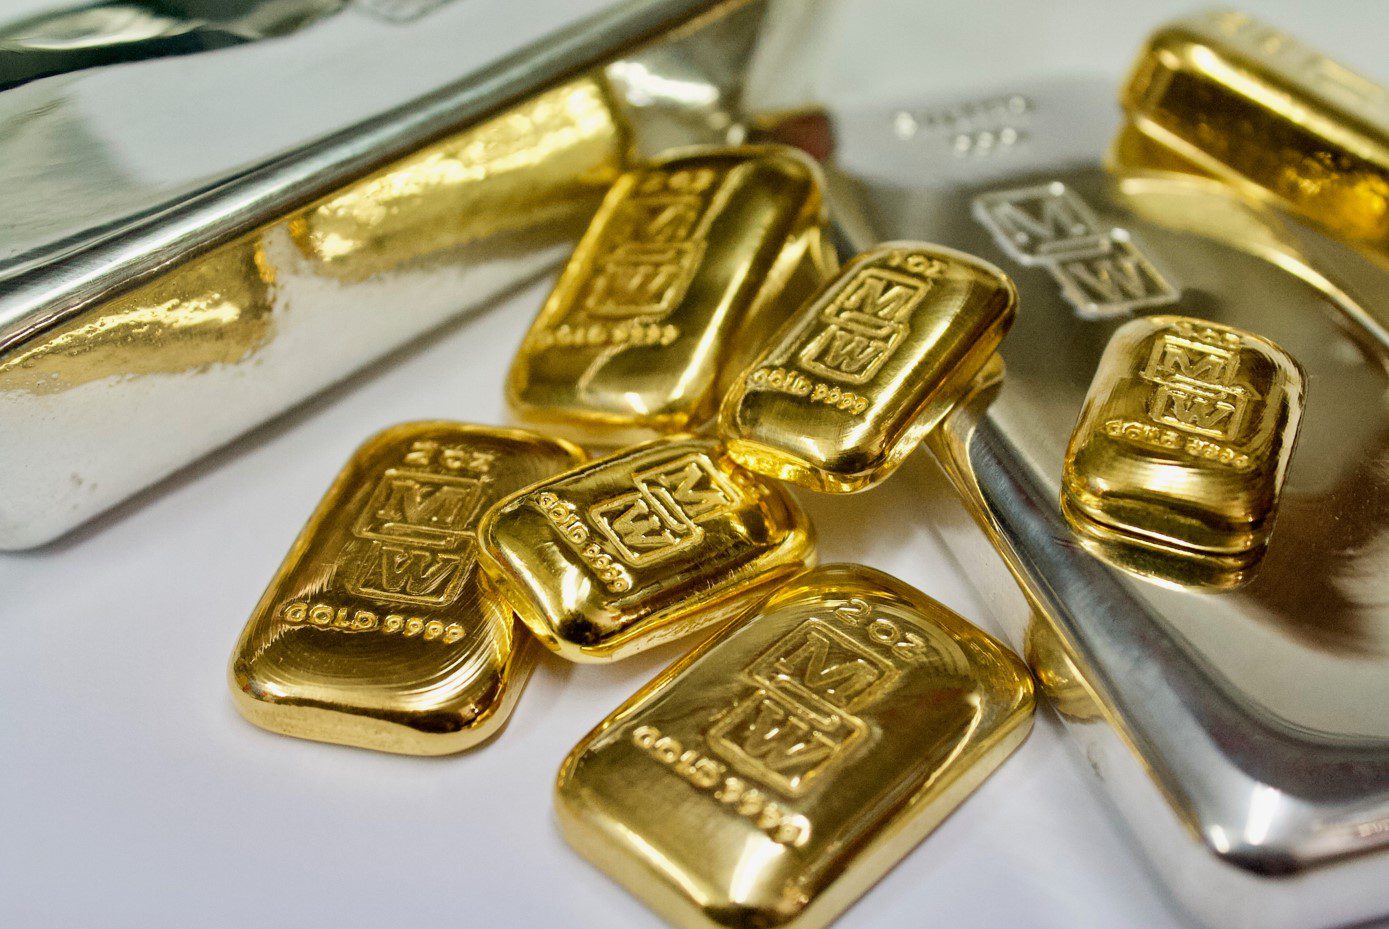 Buy Gold Luong 37.5g in Sydney or Melbourne